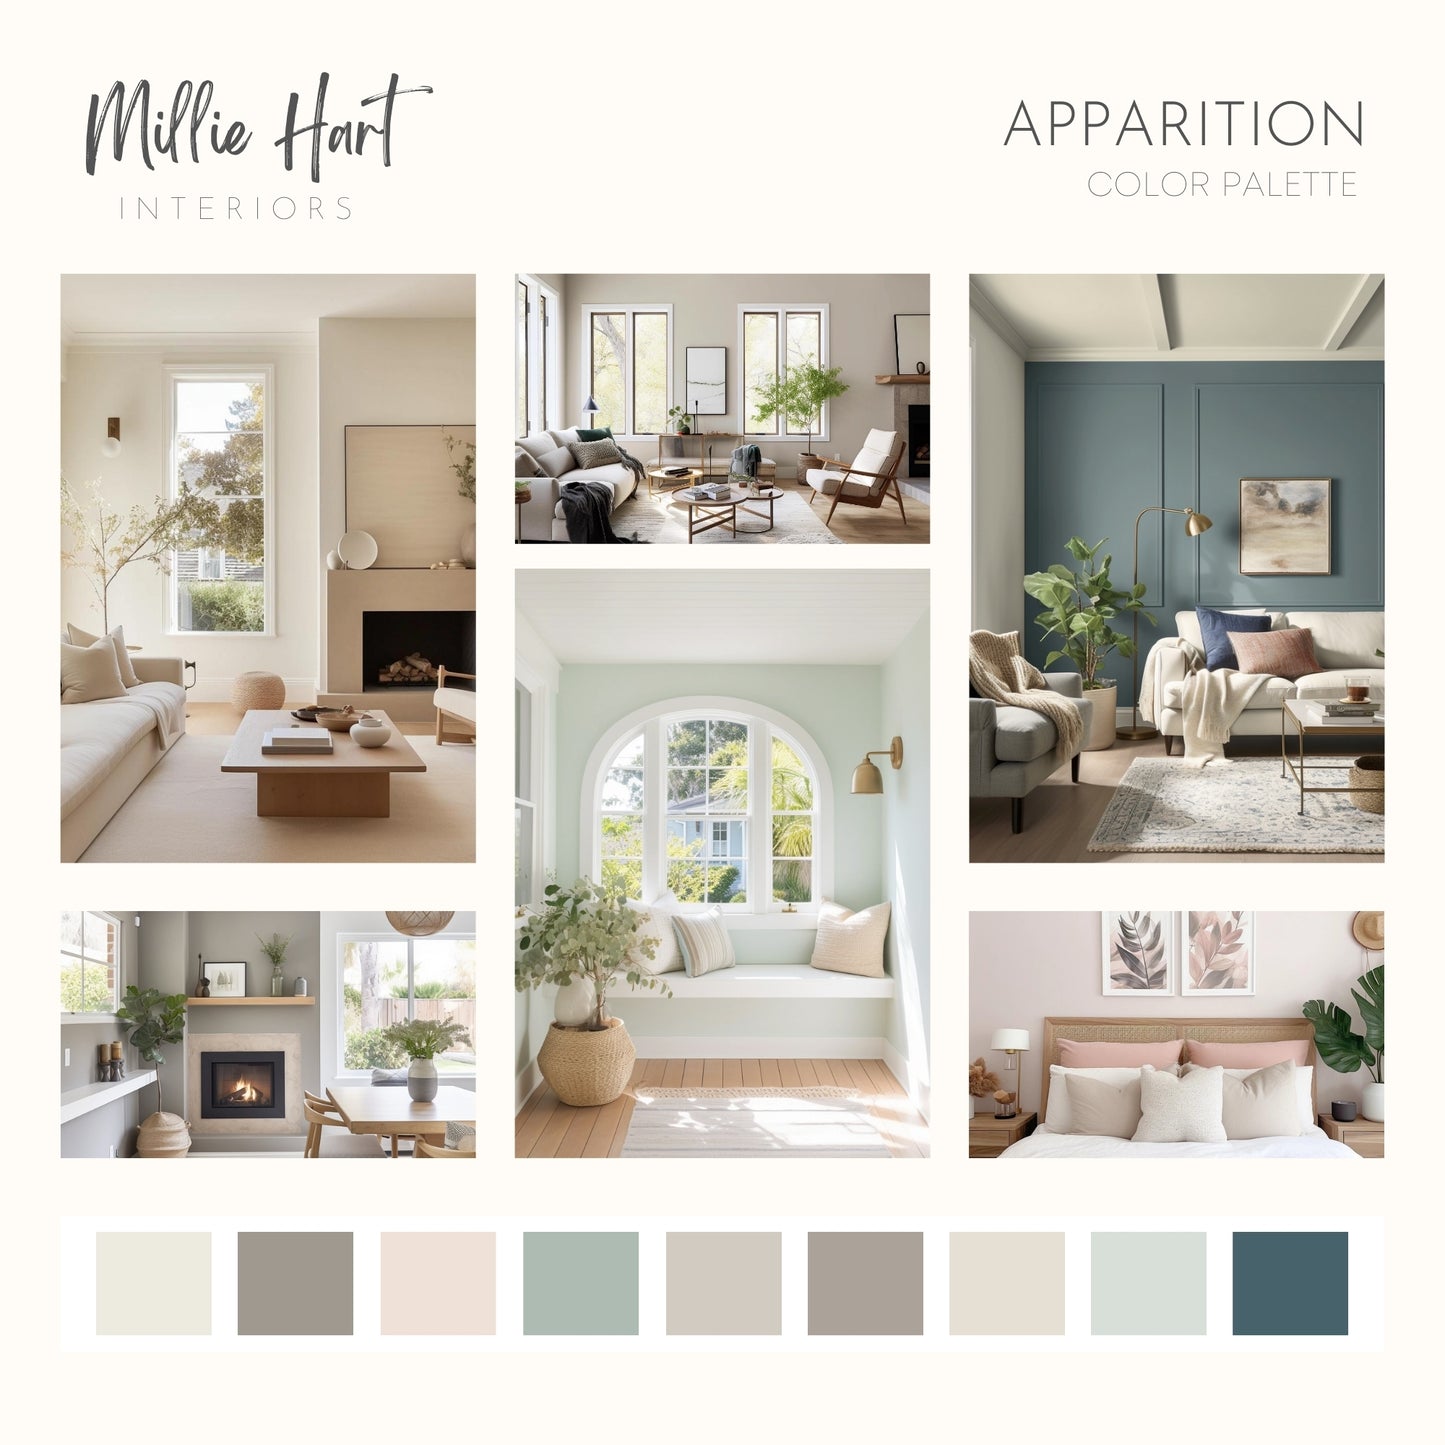 Apparition Benjamin Moore Paint Palette - Modern Neutral Interior Paint Colors for Home - Coordinating Interior Design Color Palette, Benjamin Moore Coastal